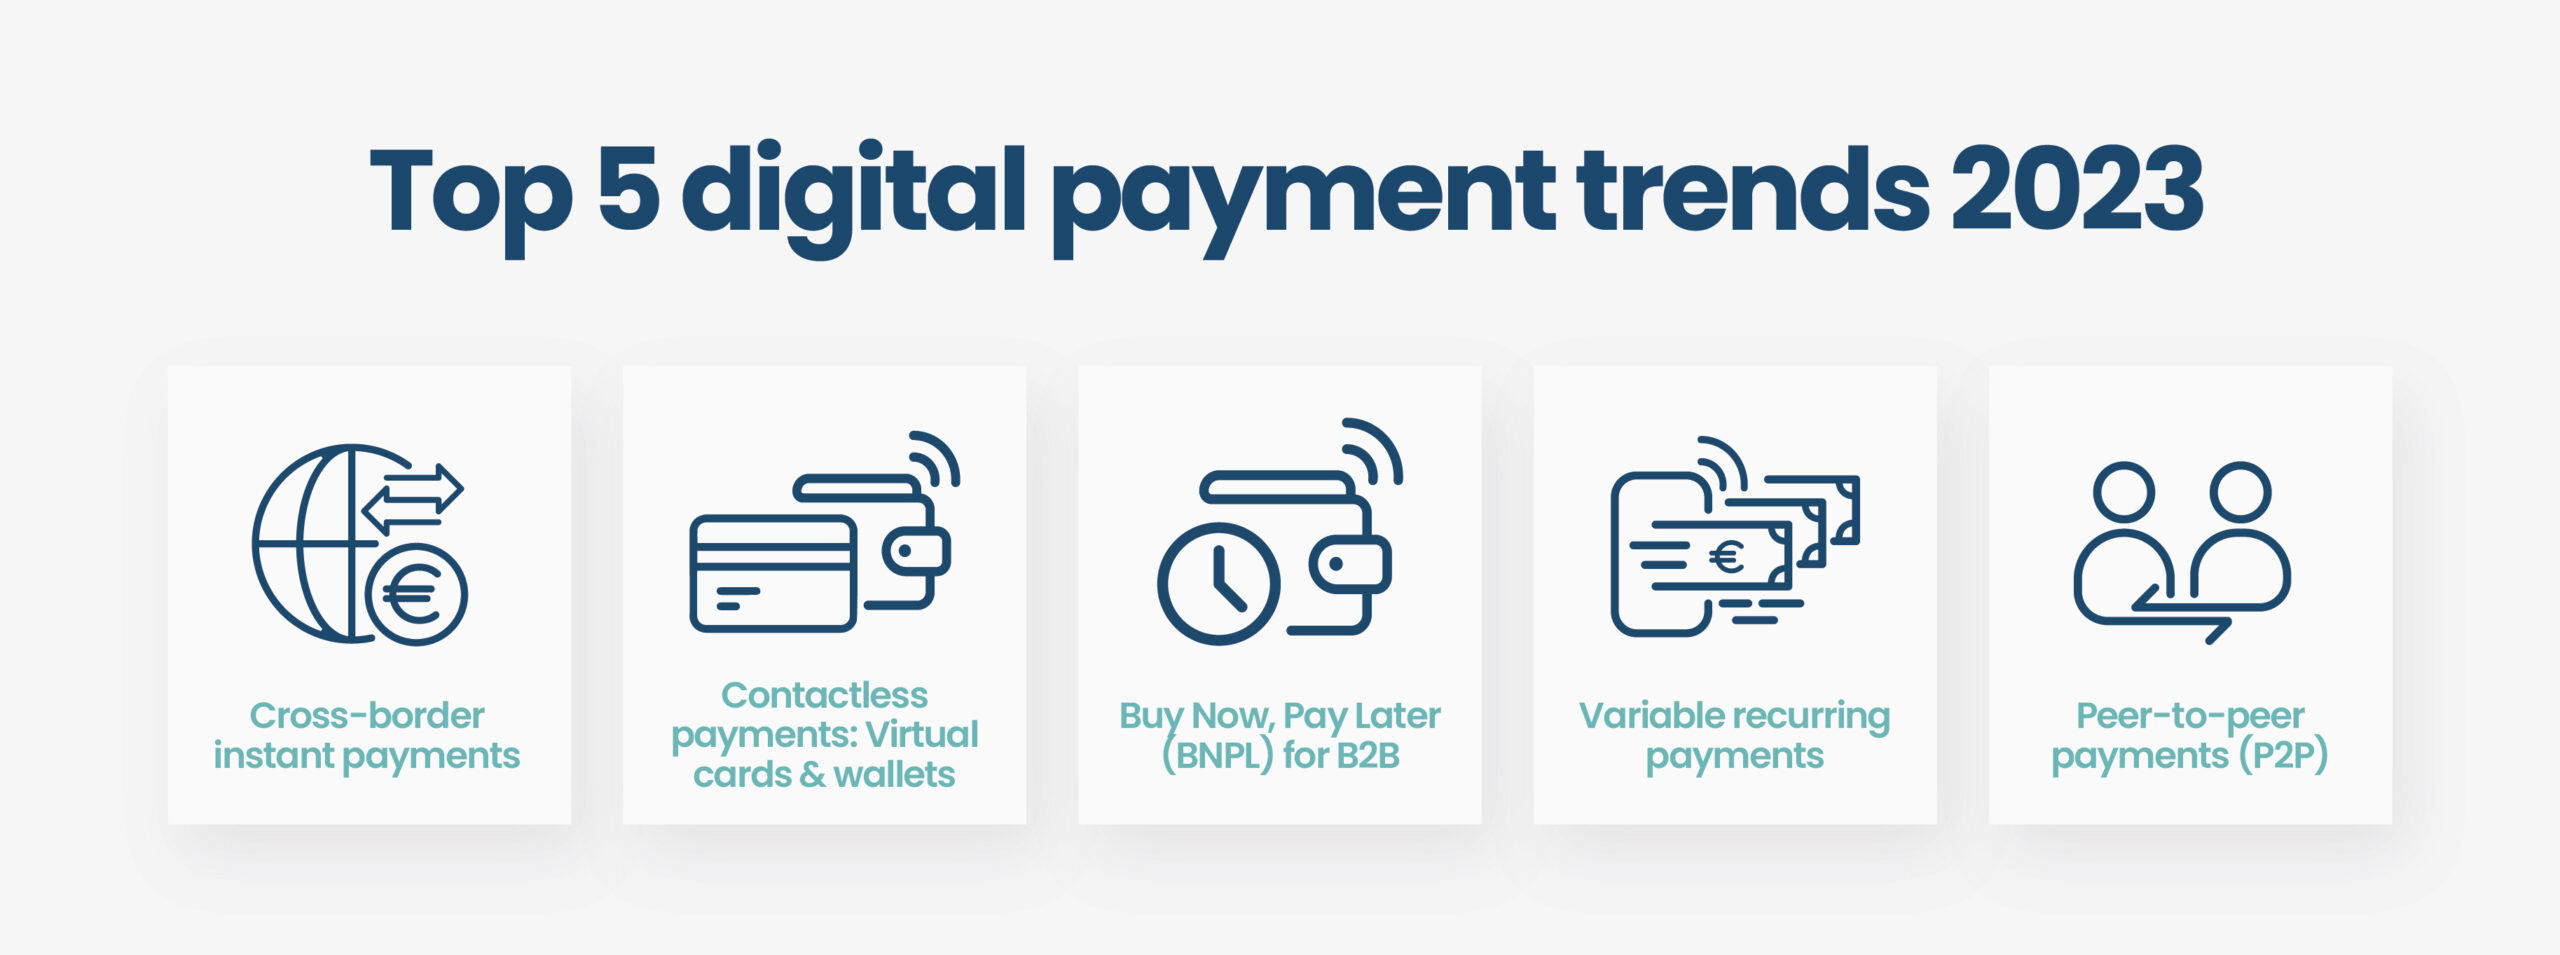 The top 5 digital payment trends to watch in 2023